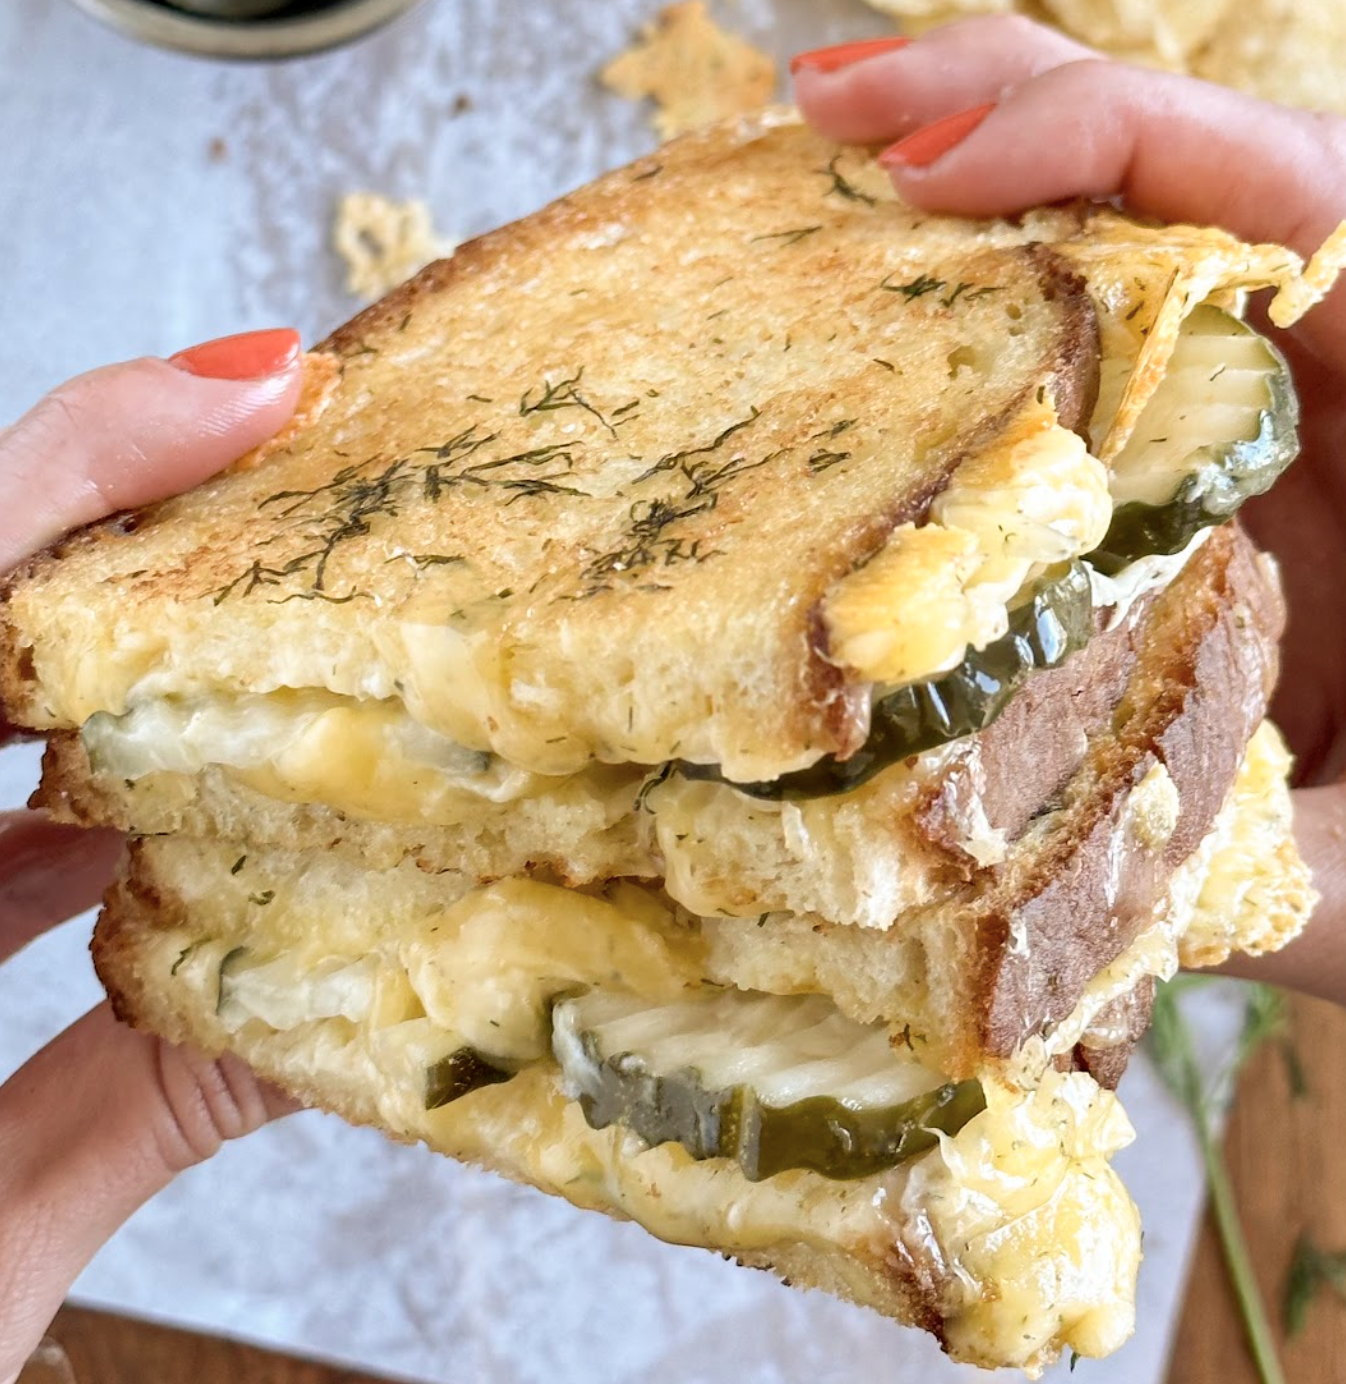 Dill Havarti Pickle Grilled Cheese